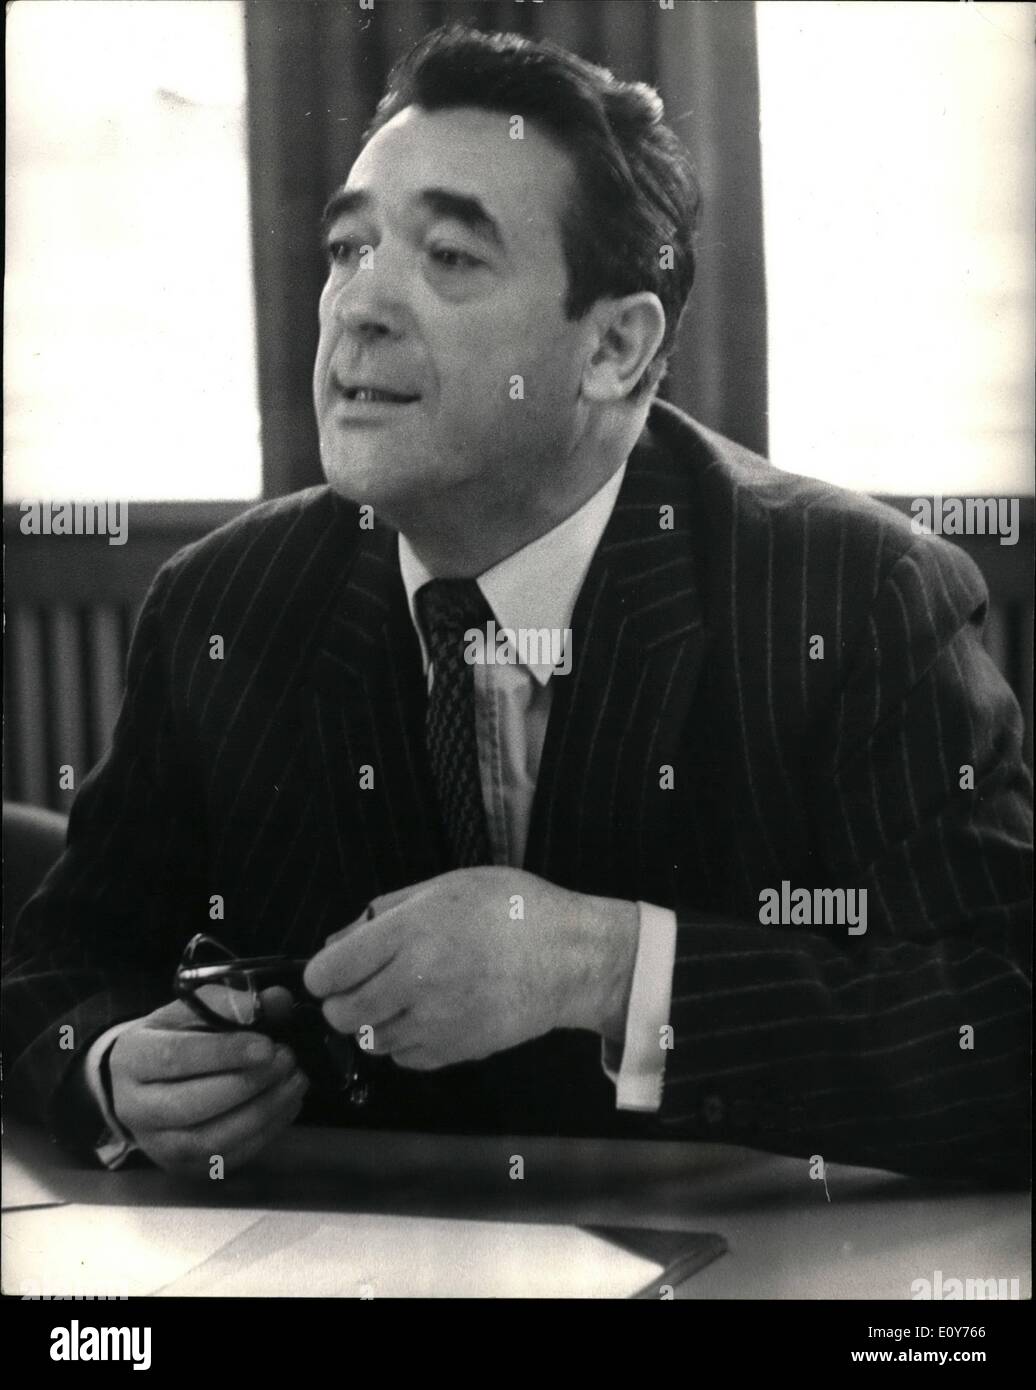 Dec. 31, 1968 - Mr. Robert Maxwell holds press conference: Mr.Robert Maxwell, whose after to News of the world shareholders closes at 3 p.m. today held a press conference, at Hill Samuel, Wood Street, E.C.2. Photo shows Mr. Robert Maxwell seen speaking at today's Press Conference. Stock Photo